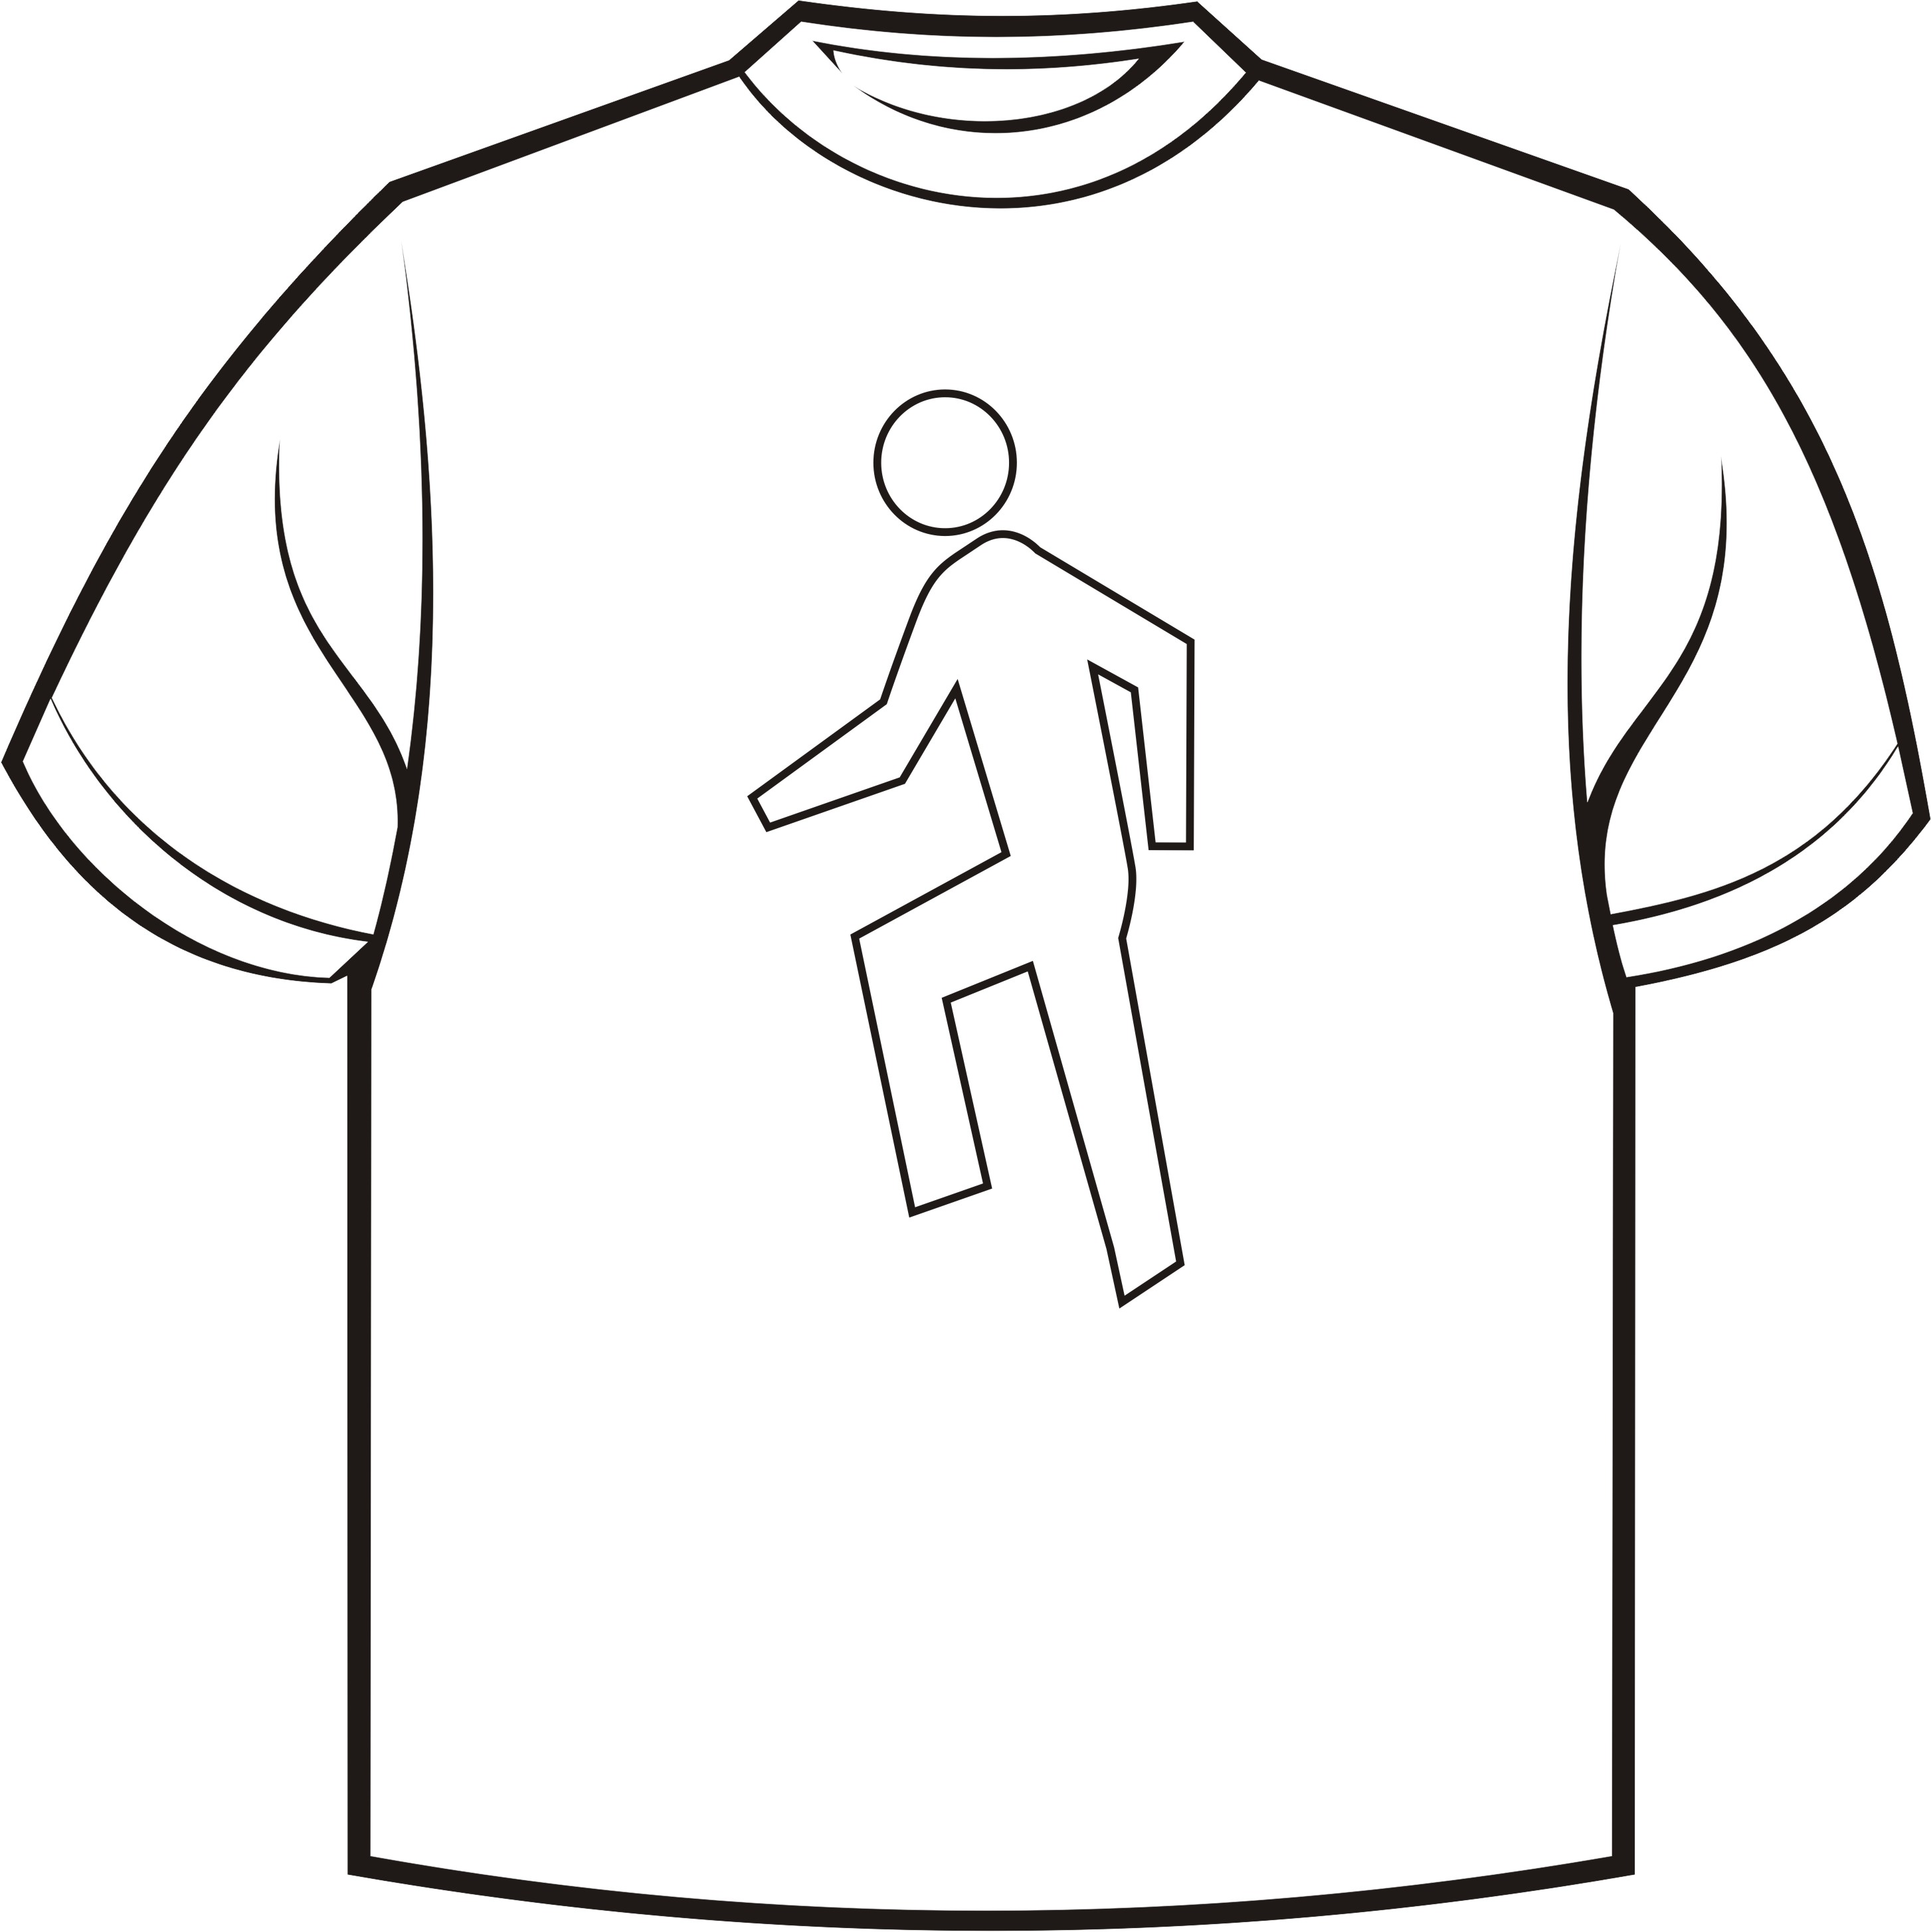 Plane White T Shirt To Draw On - ClipArt Best